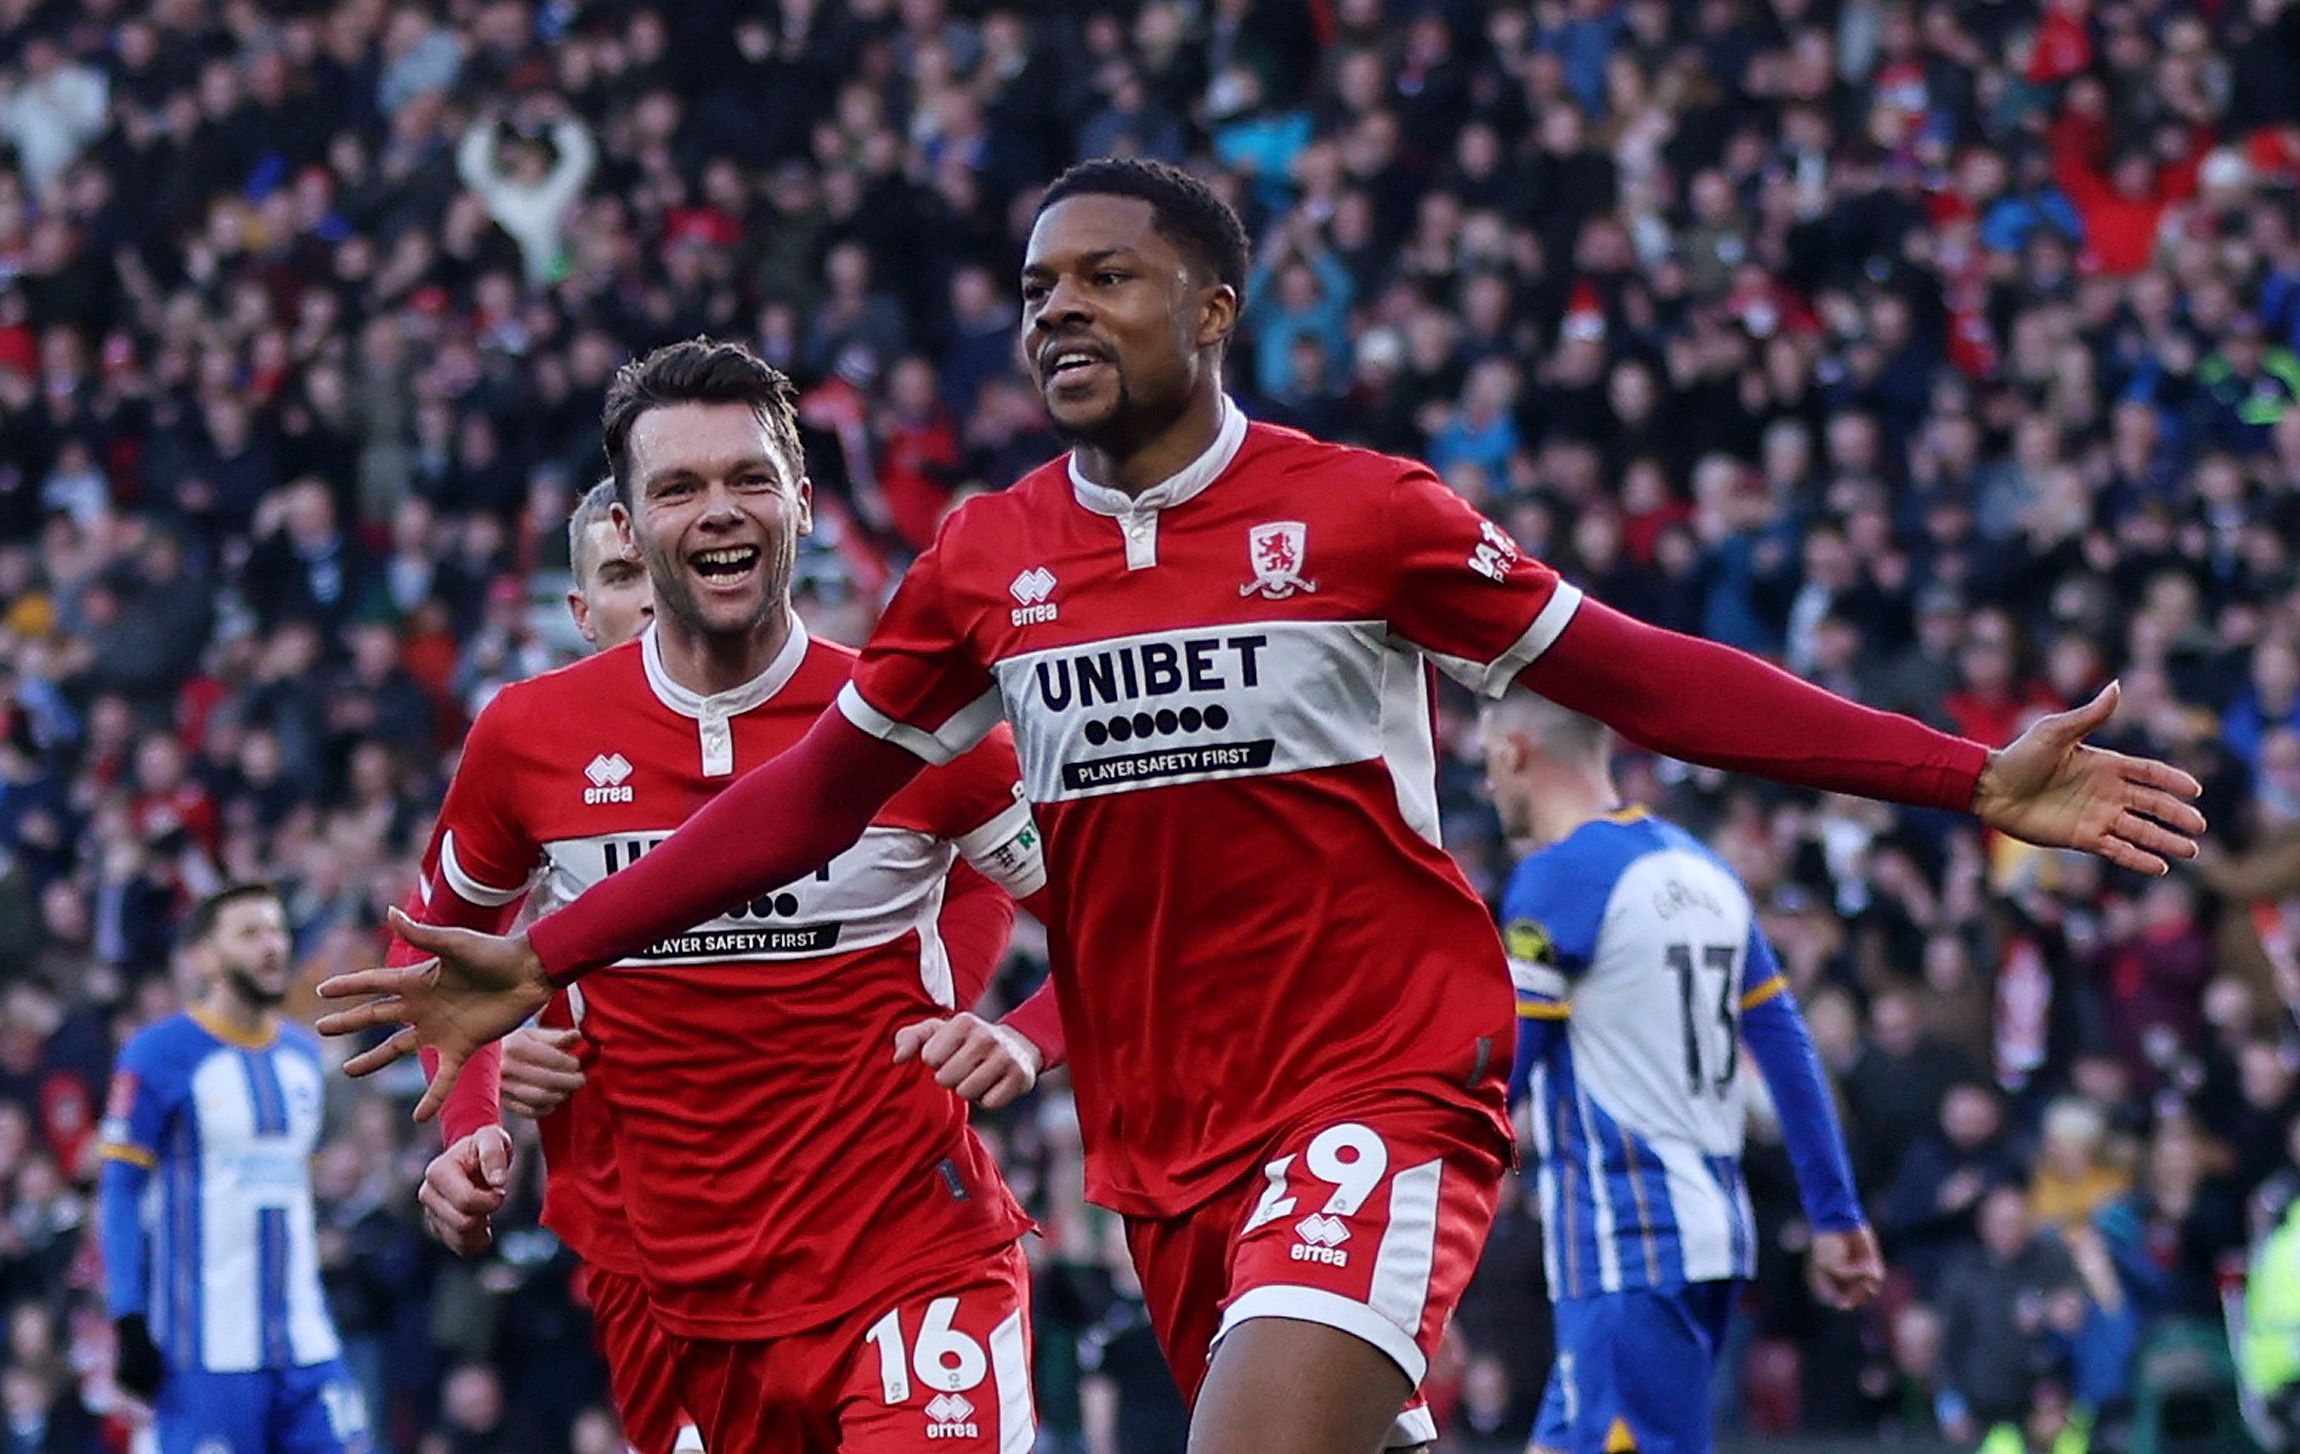 Soccer Football - FA Cup Third Round - Middlesbrough v Brighton &amp; Hove Albion - Riverside Stadium, Middlesbrough, Britain - January 7, 2023 Middlesbrough's Chuba Akpom celebrates scoring their first goal with Jonny Howson Action Images via Reuters/Lee Smith